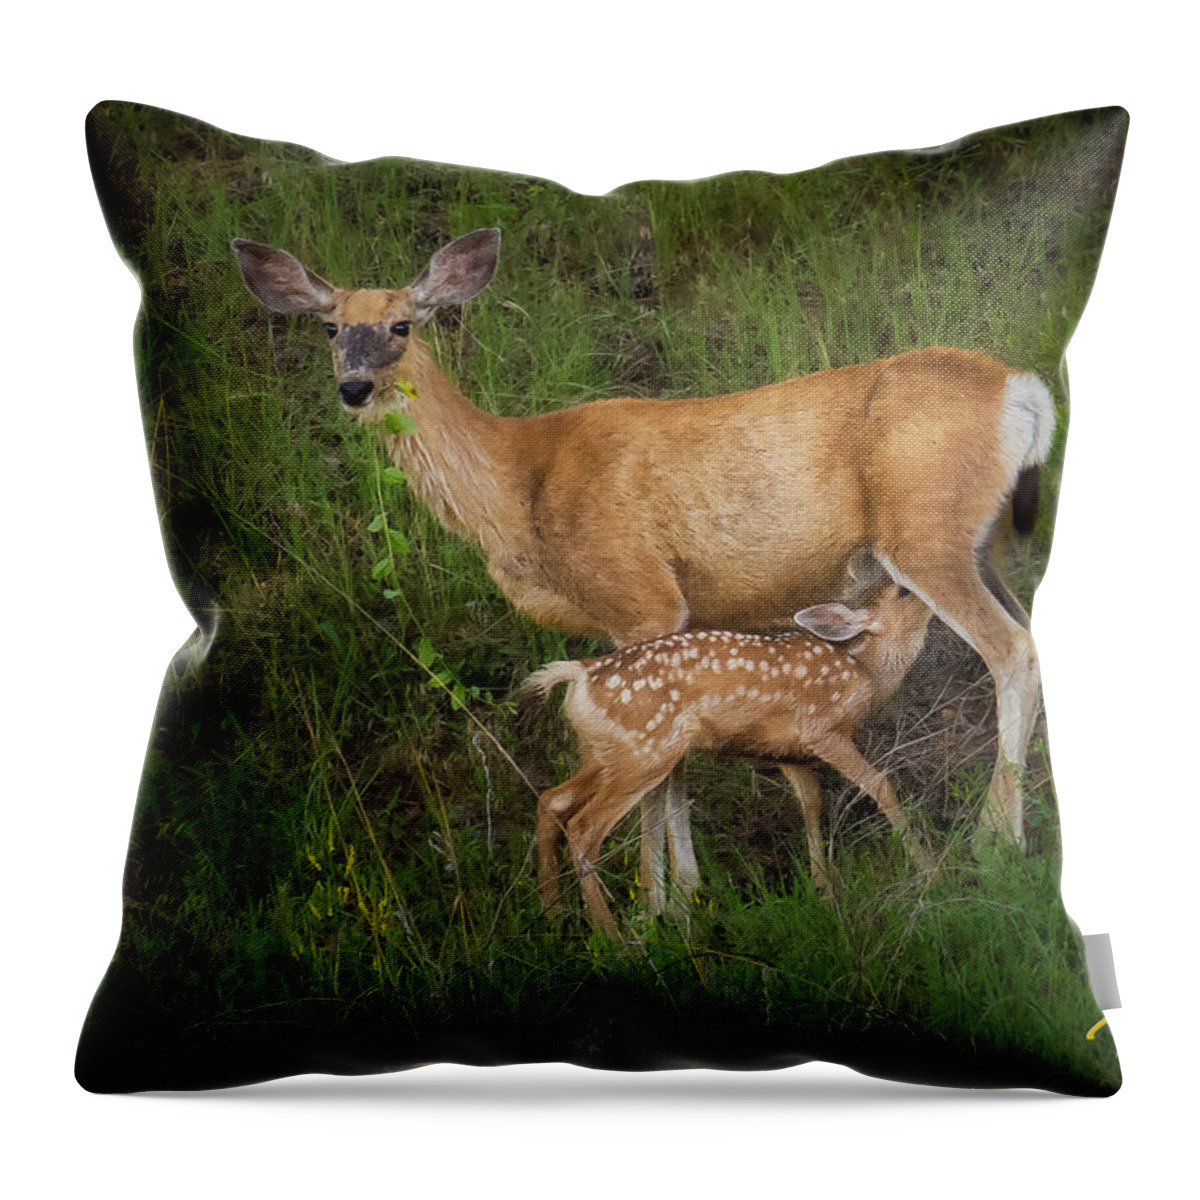 Animals Throw Pillow featuring the photograph Feeding Fawn by Rikk Flohr